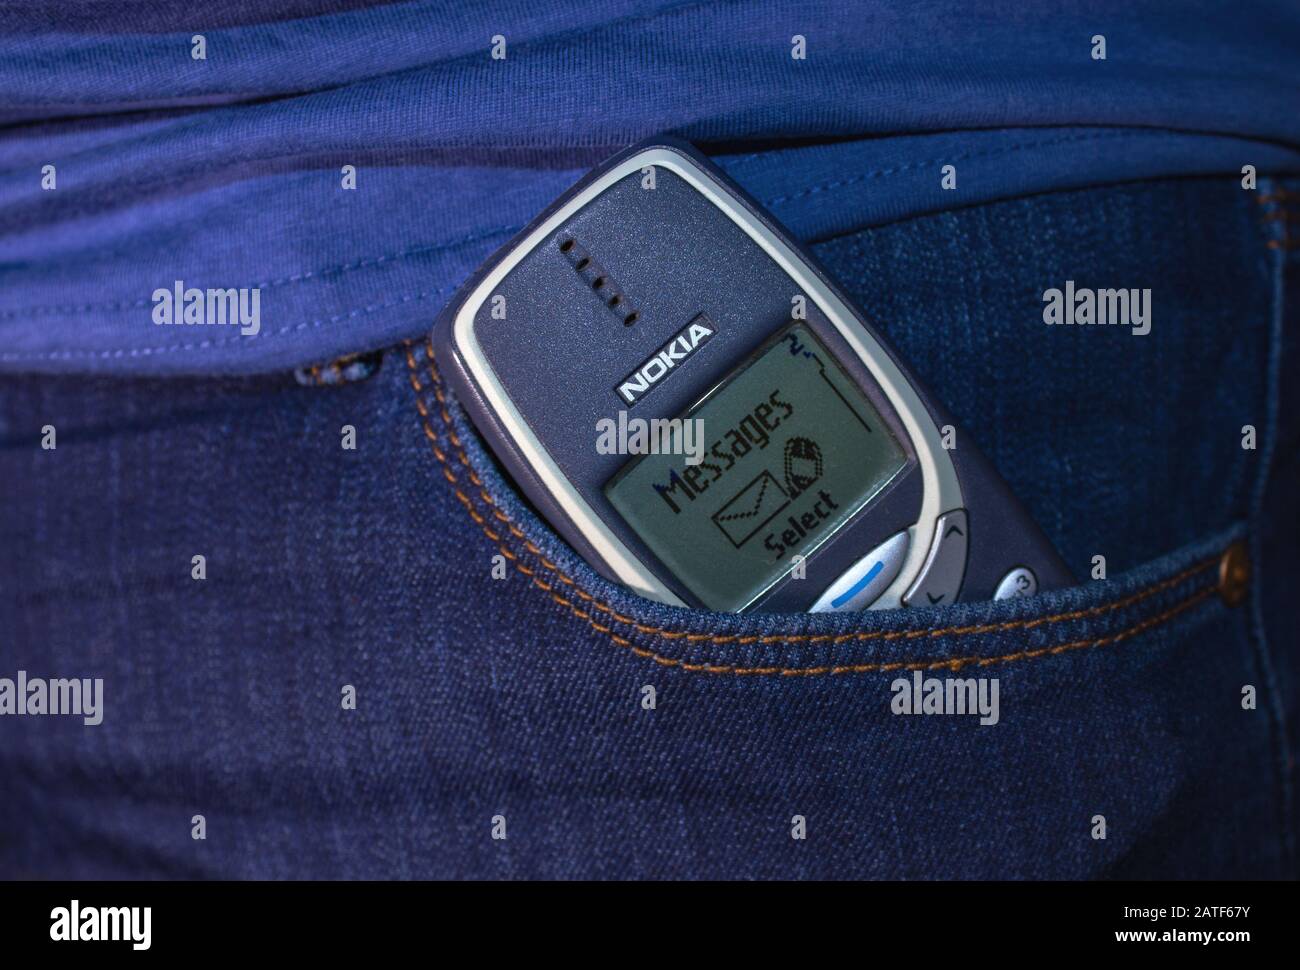 Petrozavodsk. Karelia. Russia. January 8. 2020: Old nokia mobile phone sticks out of a pocket of blue jeans Stock Photo